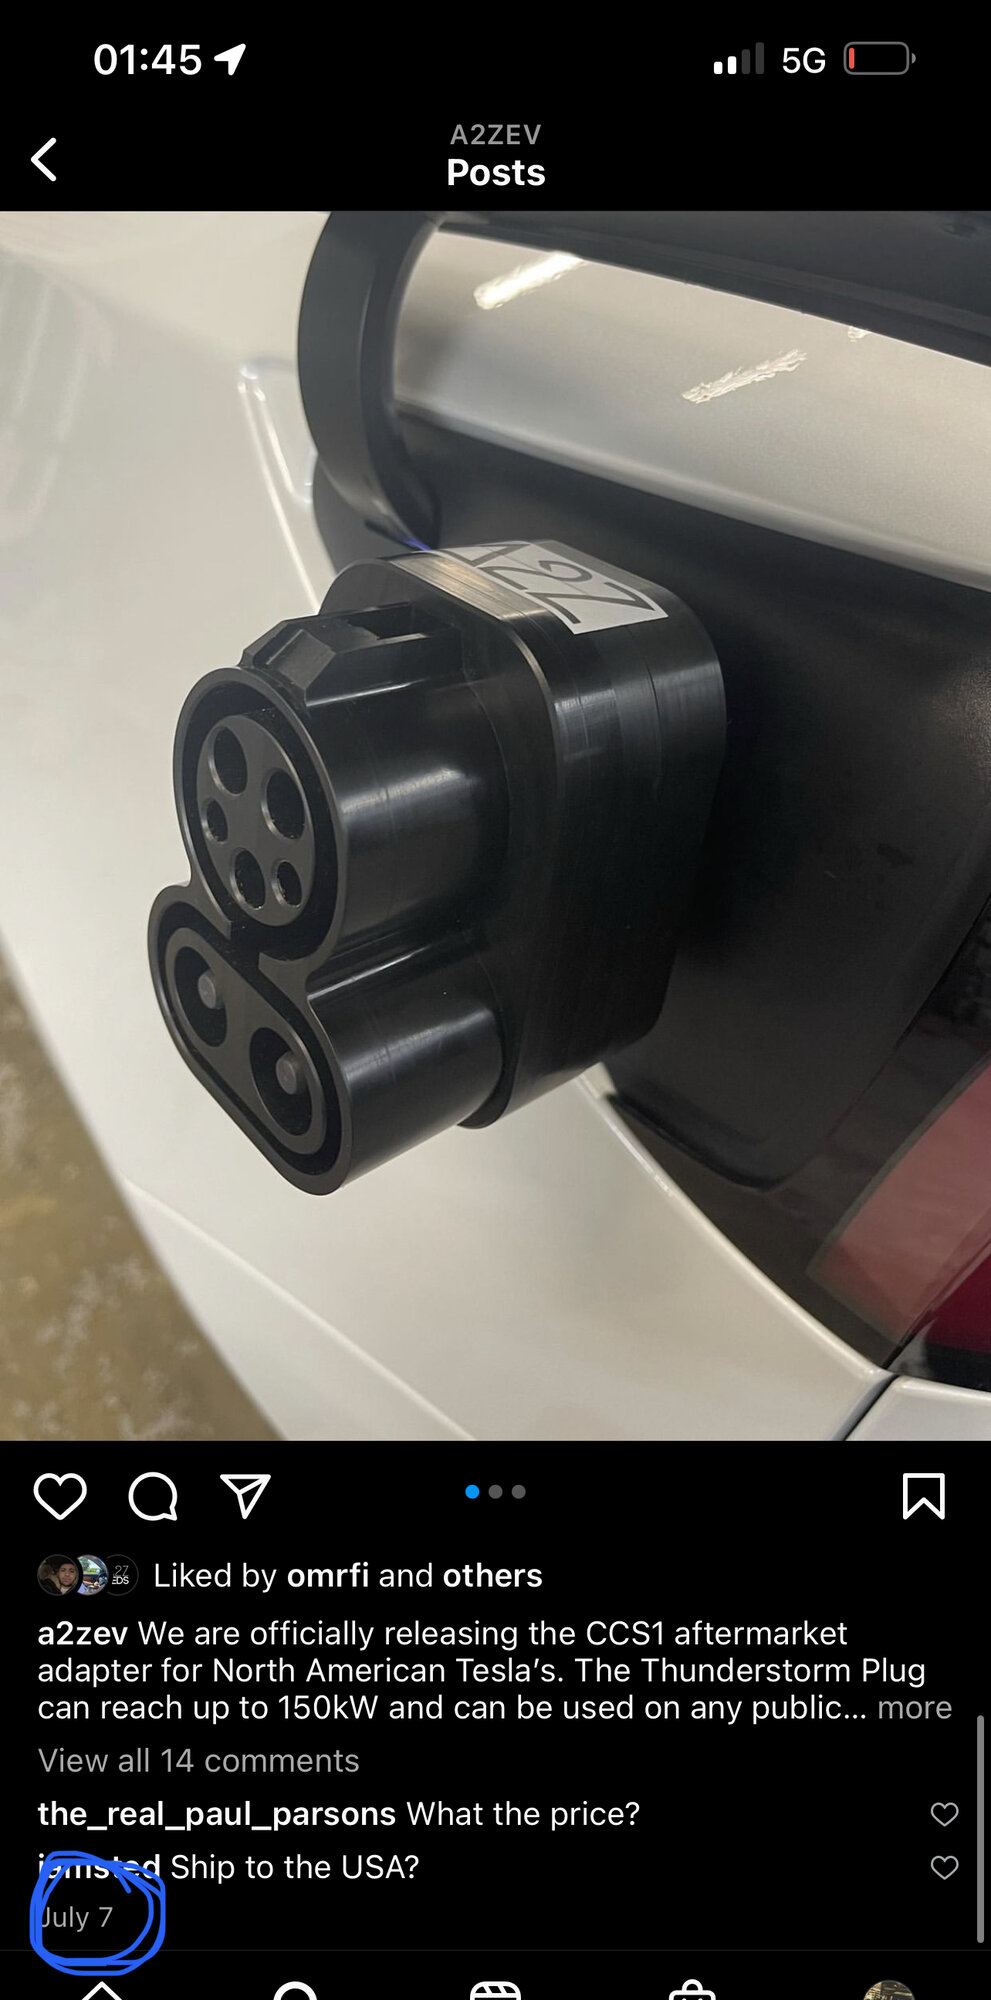 New Sources of Tesla 'OEM,' Tesla-like, and/or Third-Party CCS1 Adapters